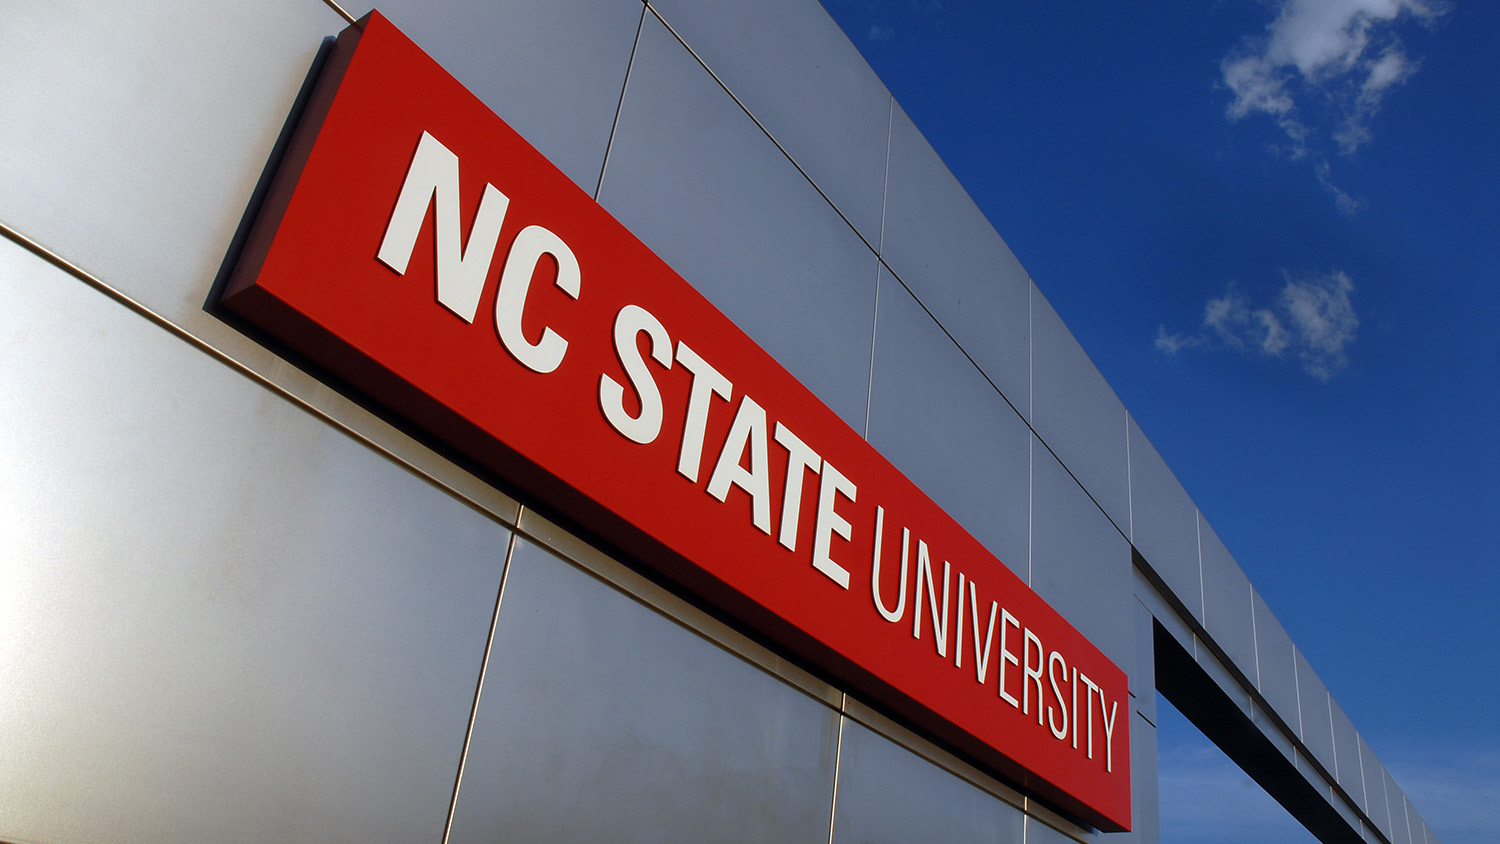 The NC State gateway.